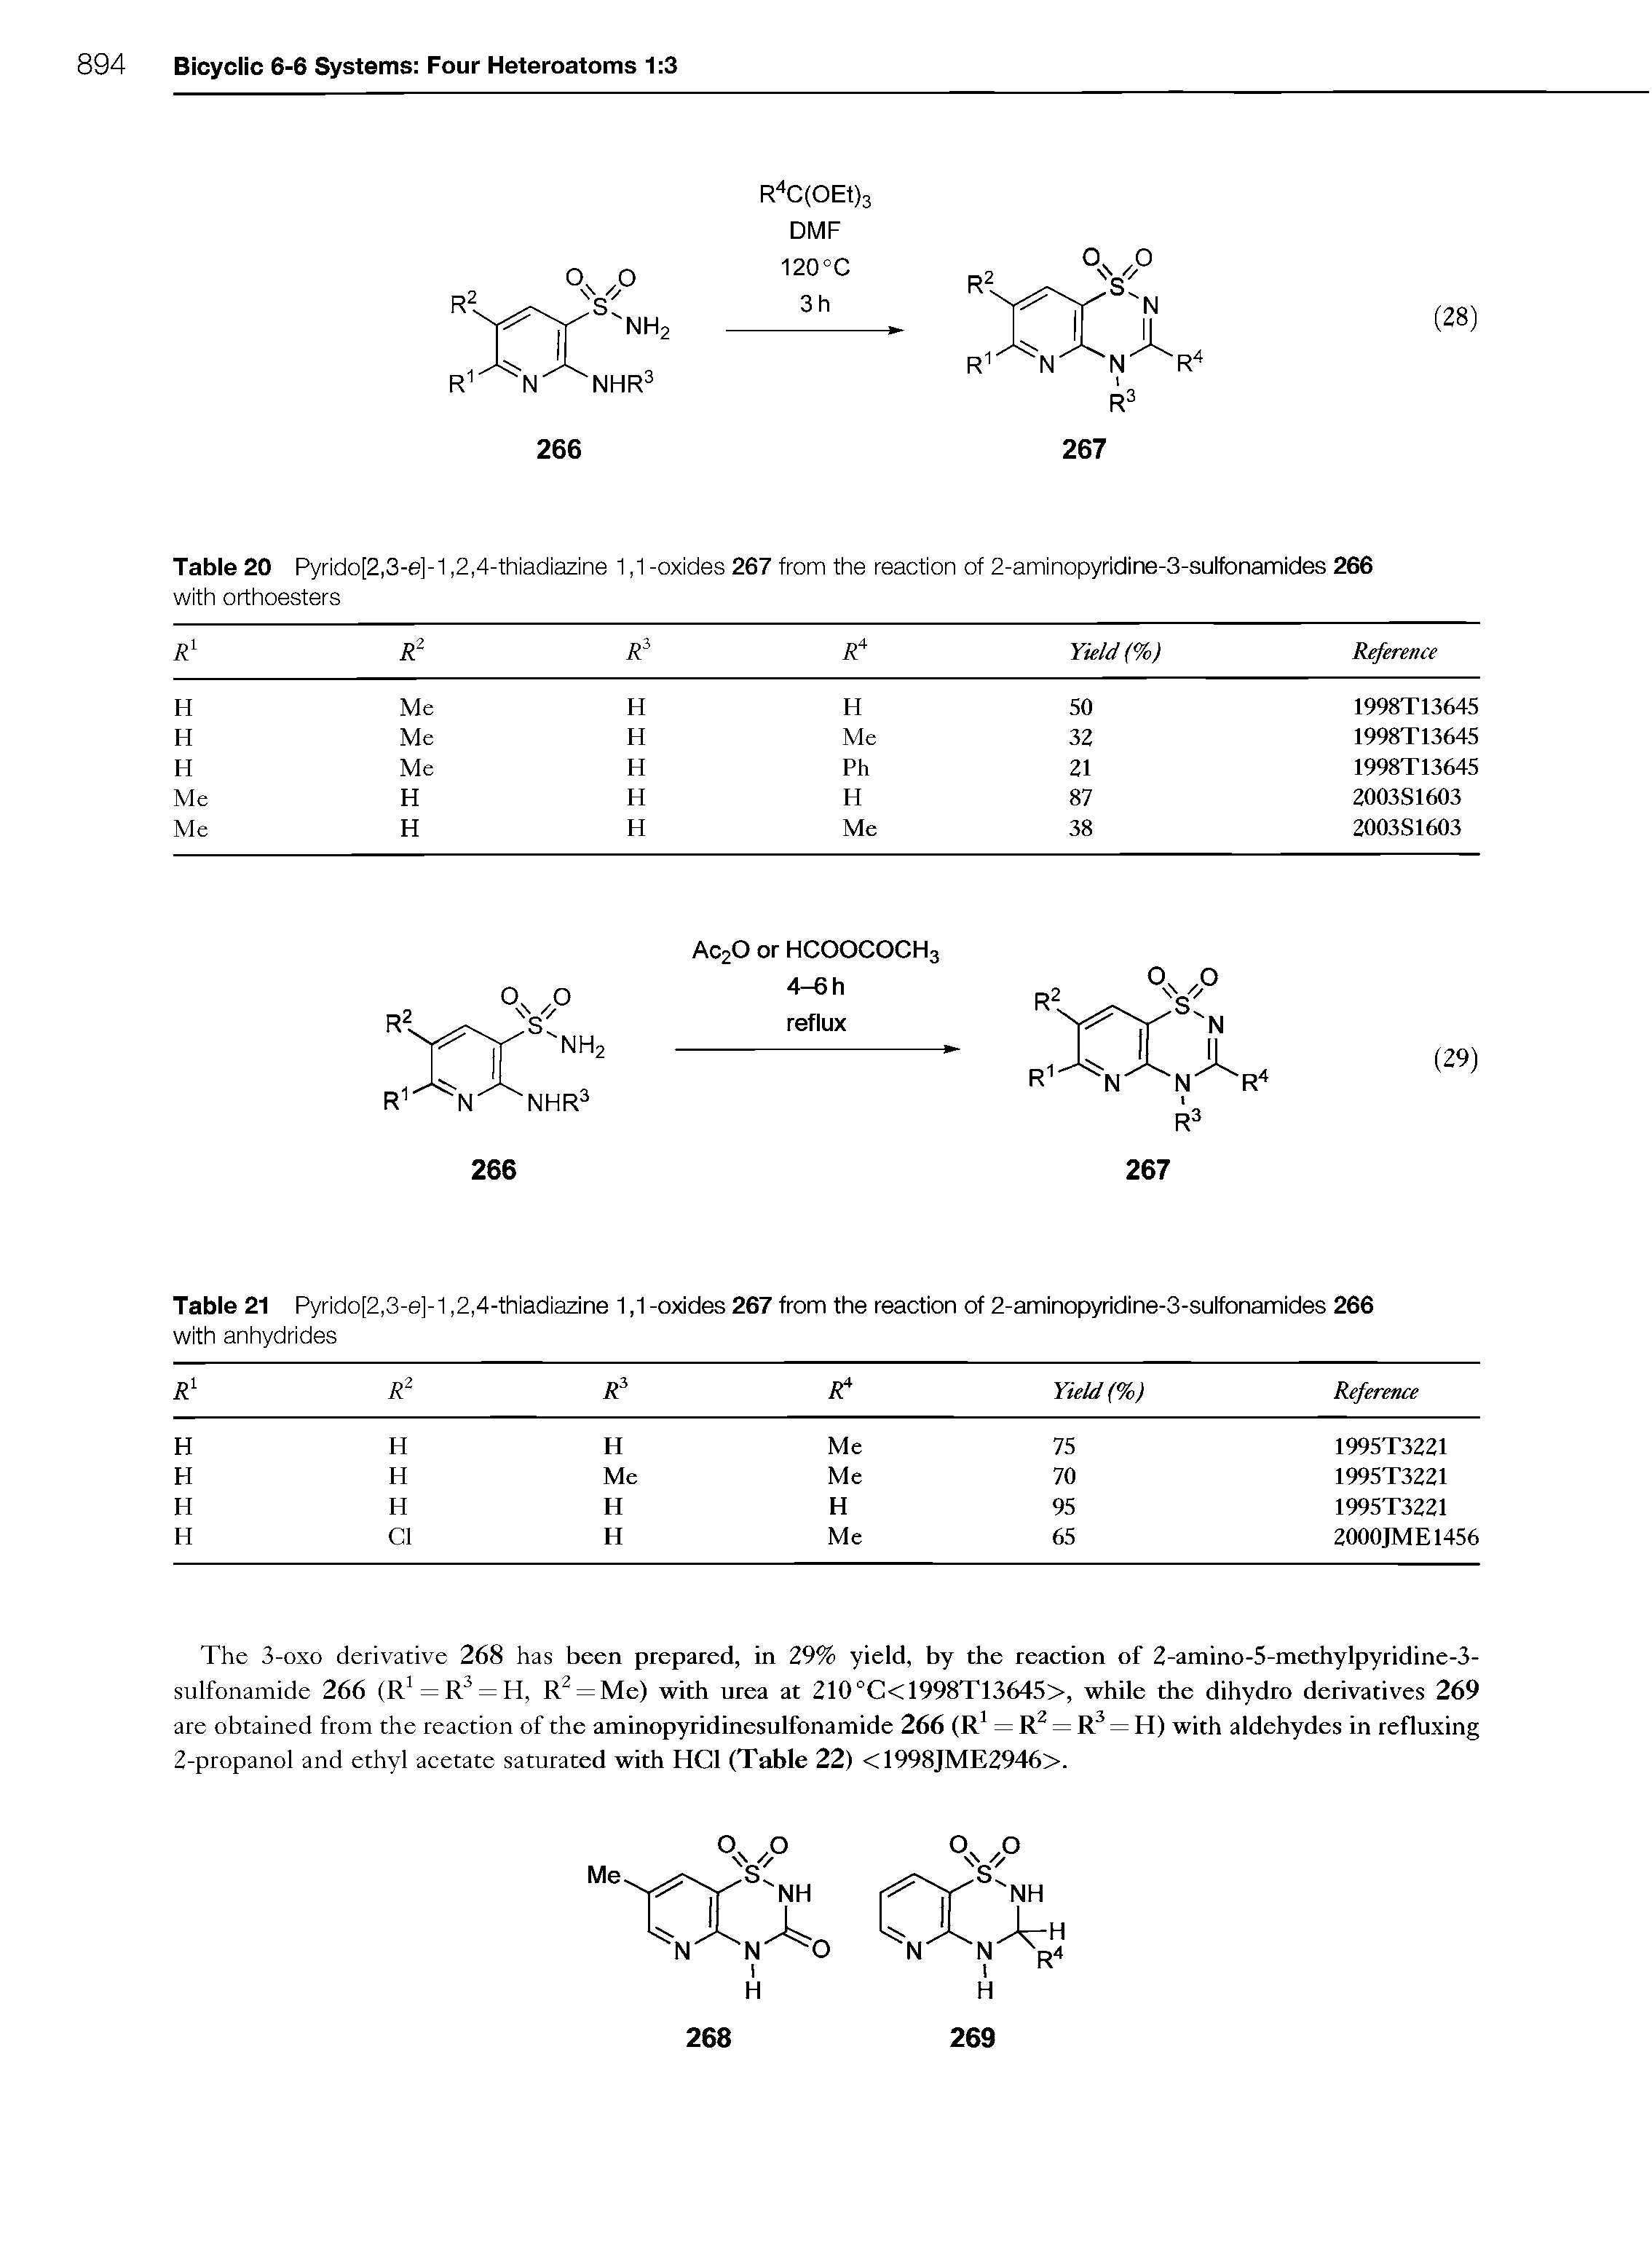 Table 20 Pyrido[2,3-e]-1,2,4-thiadiazine 1,1 -oxides 267 from the reaotion of 2-aminopyridine-3-sulfonamides 266 with orthoesters...